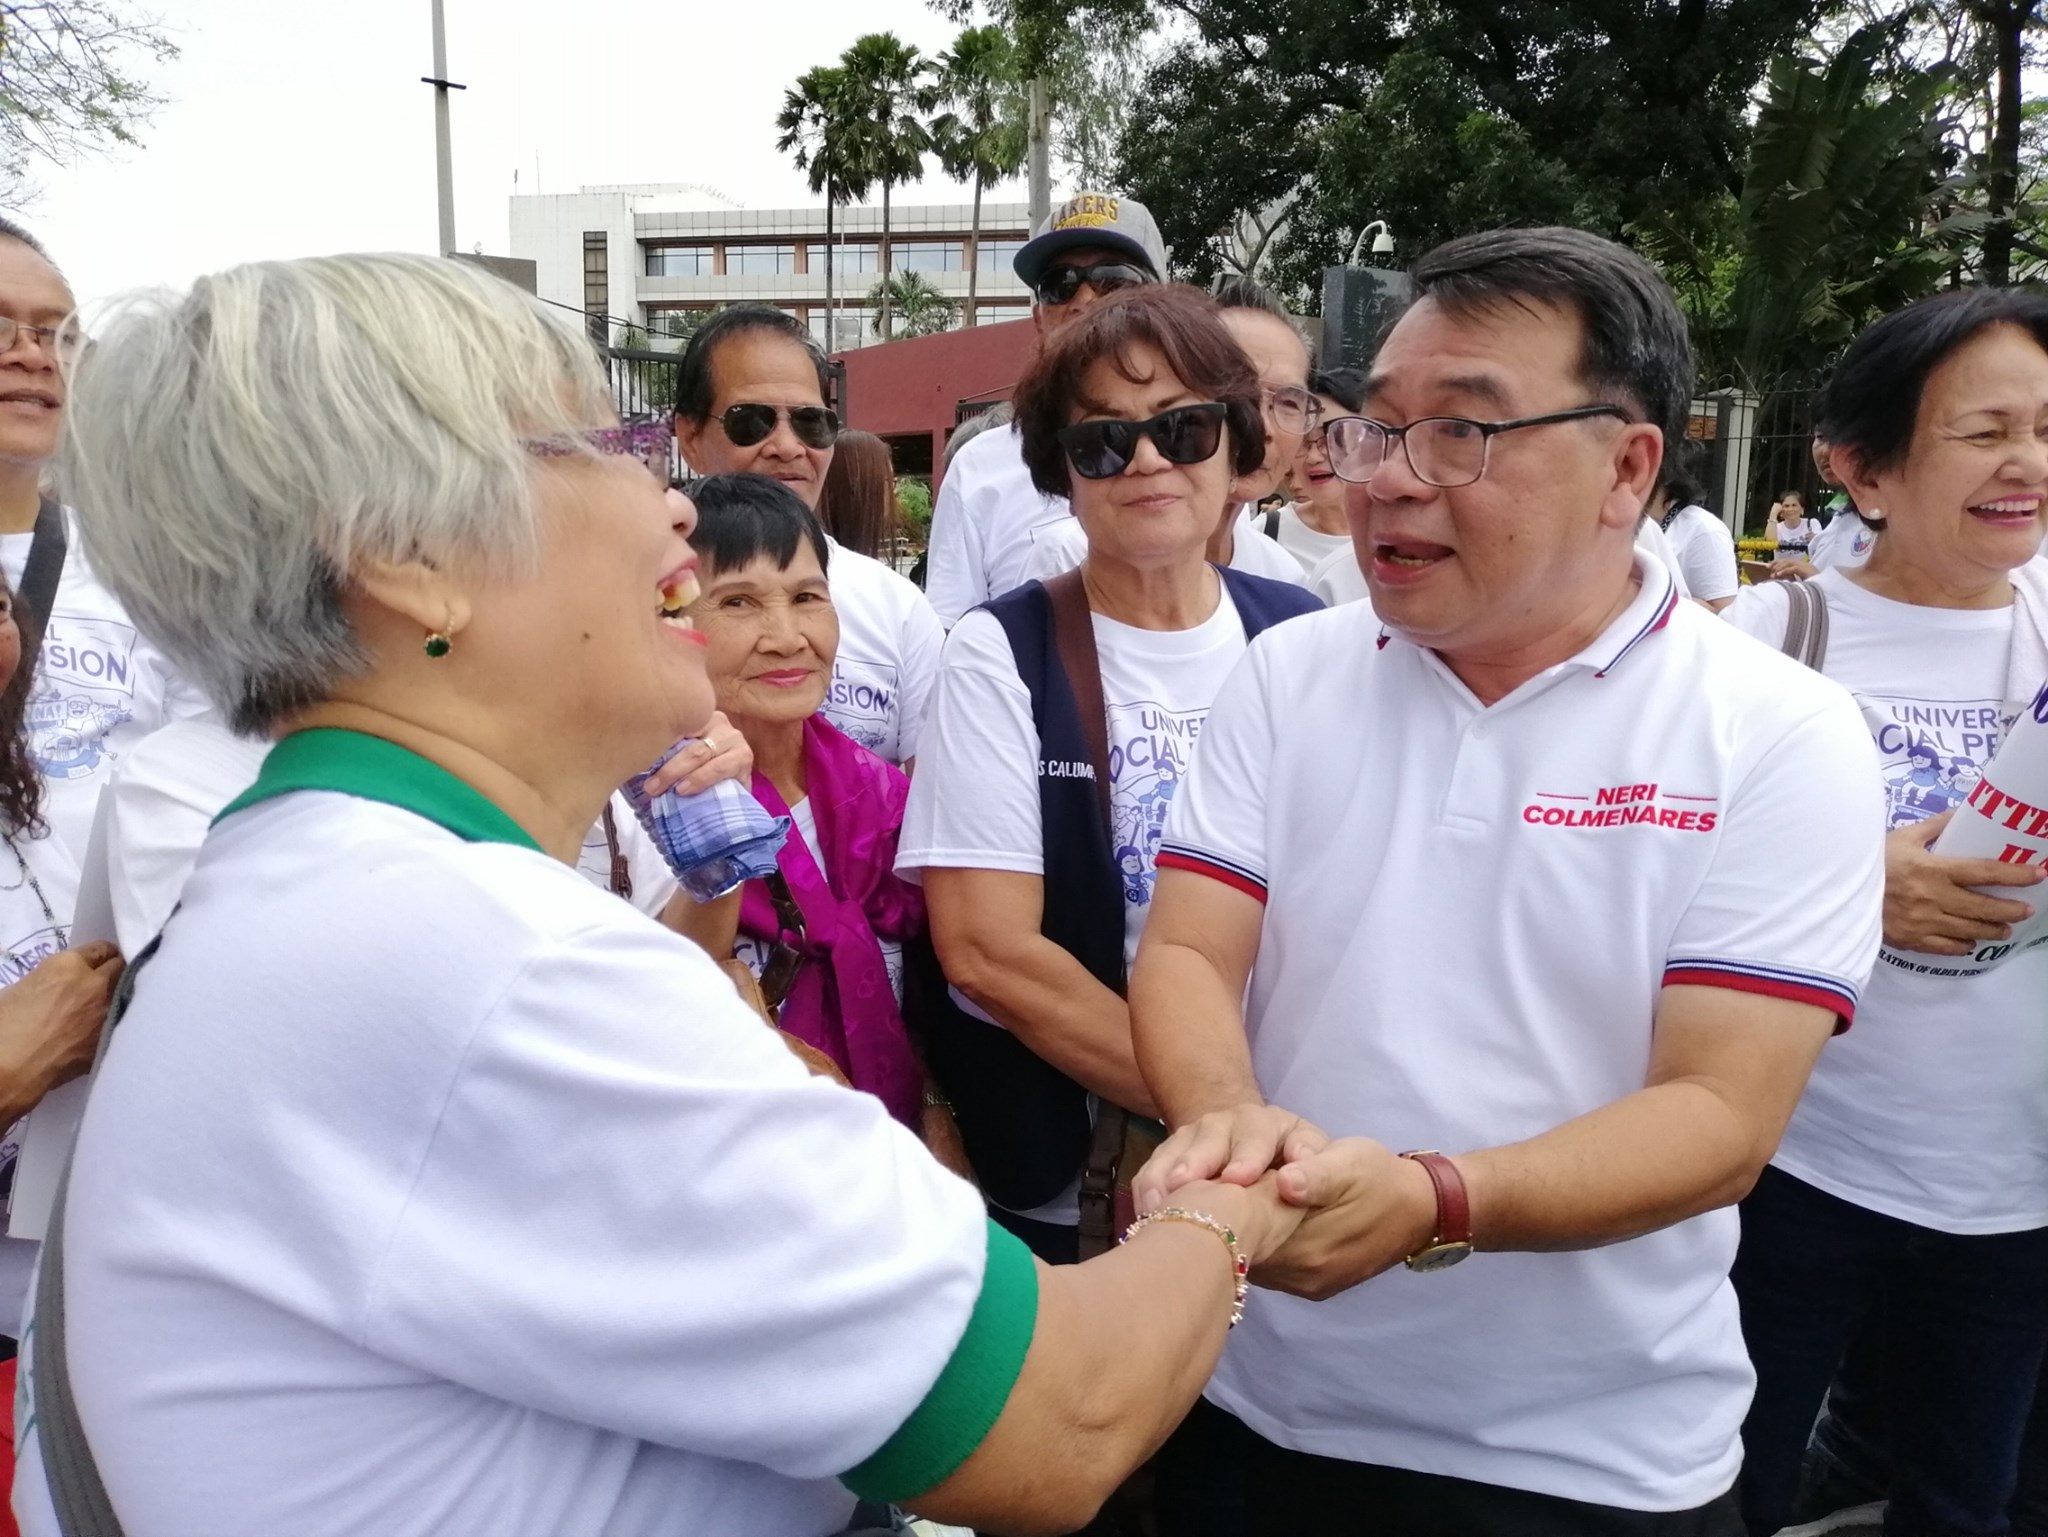 Neri Colmenares (right) shaking the hands of a supporter during the 2018 campaign. Photo: Colmenares’ Facebook page.